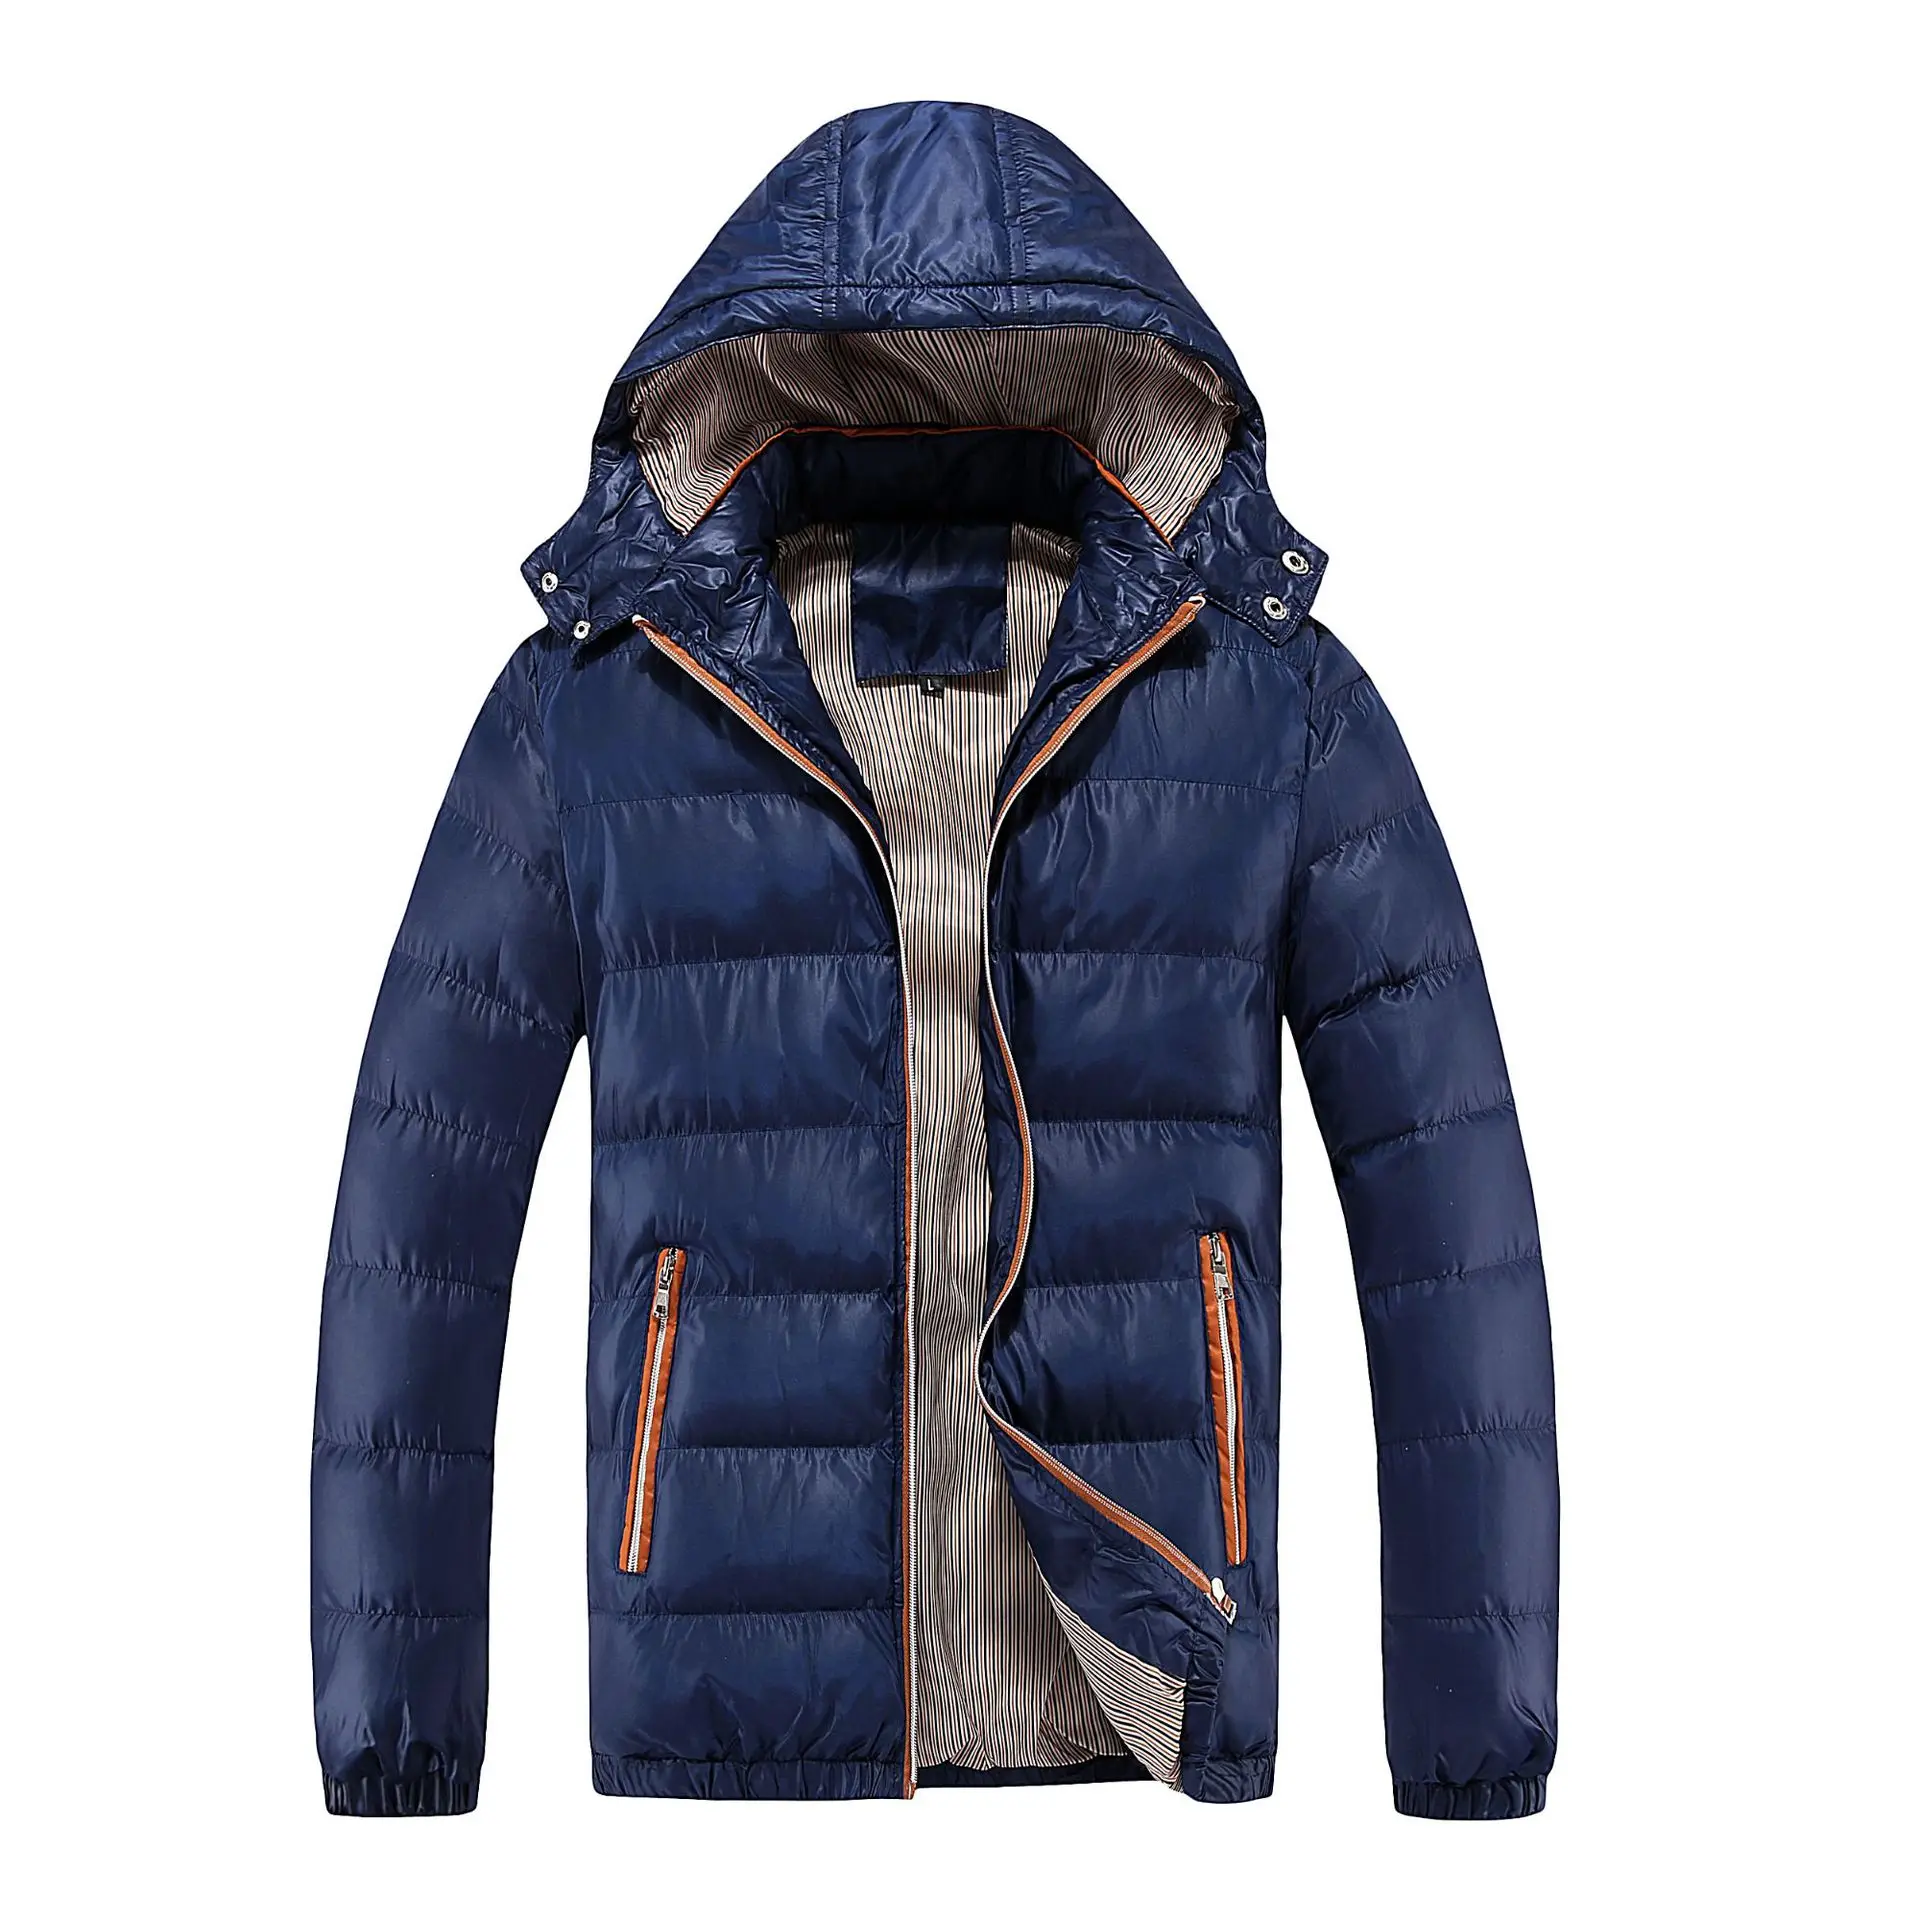 Casual Hooded Winter Jacket Men Warm Men's Thick Cotton Parka Male ...